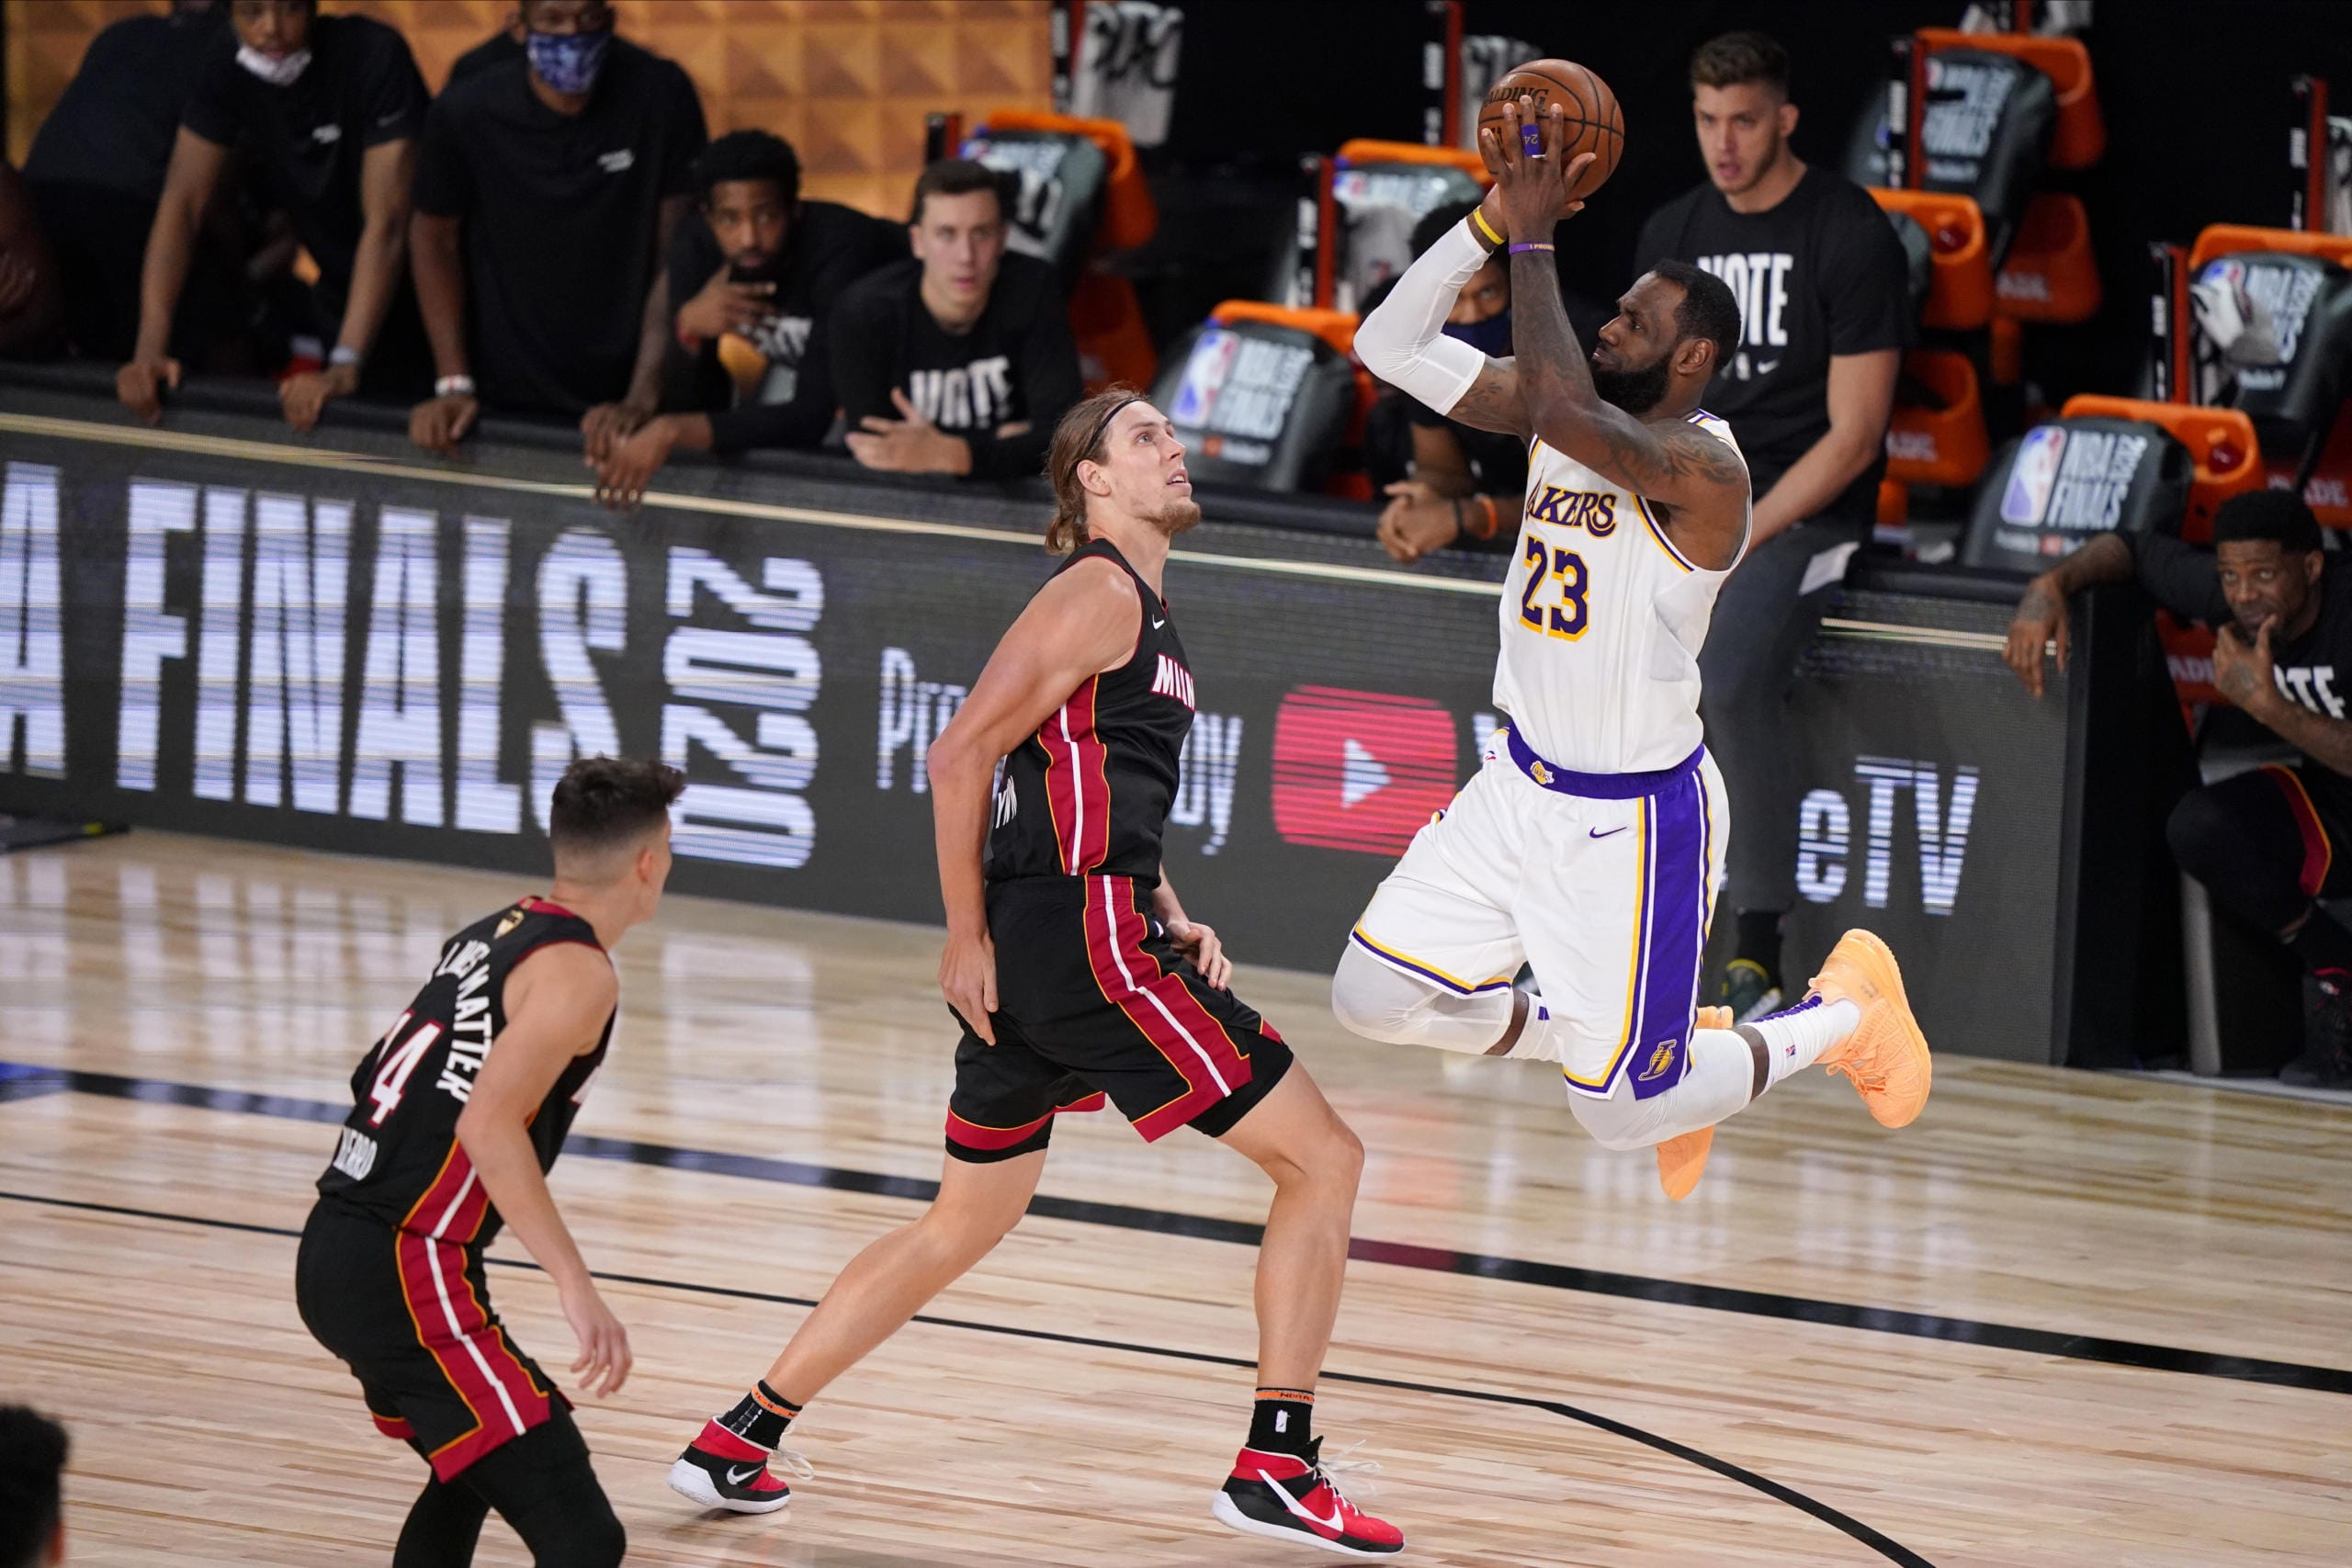 Los Angeles Lakers' LeBron James (23) takes a shot over Miami Heat's Kelly Olynyk (9) during the second half in Game 6 of basketball's NBA Finals Sunday, Oct. 11, 2020, in Lake Buena Vista, Fla. (AP Photo/Mark J.